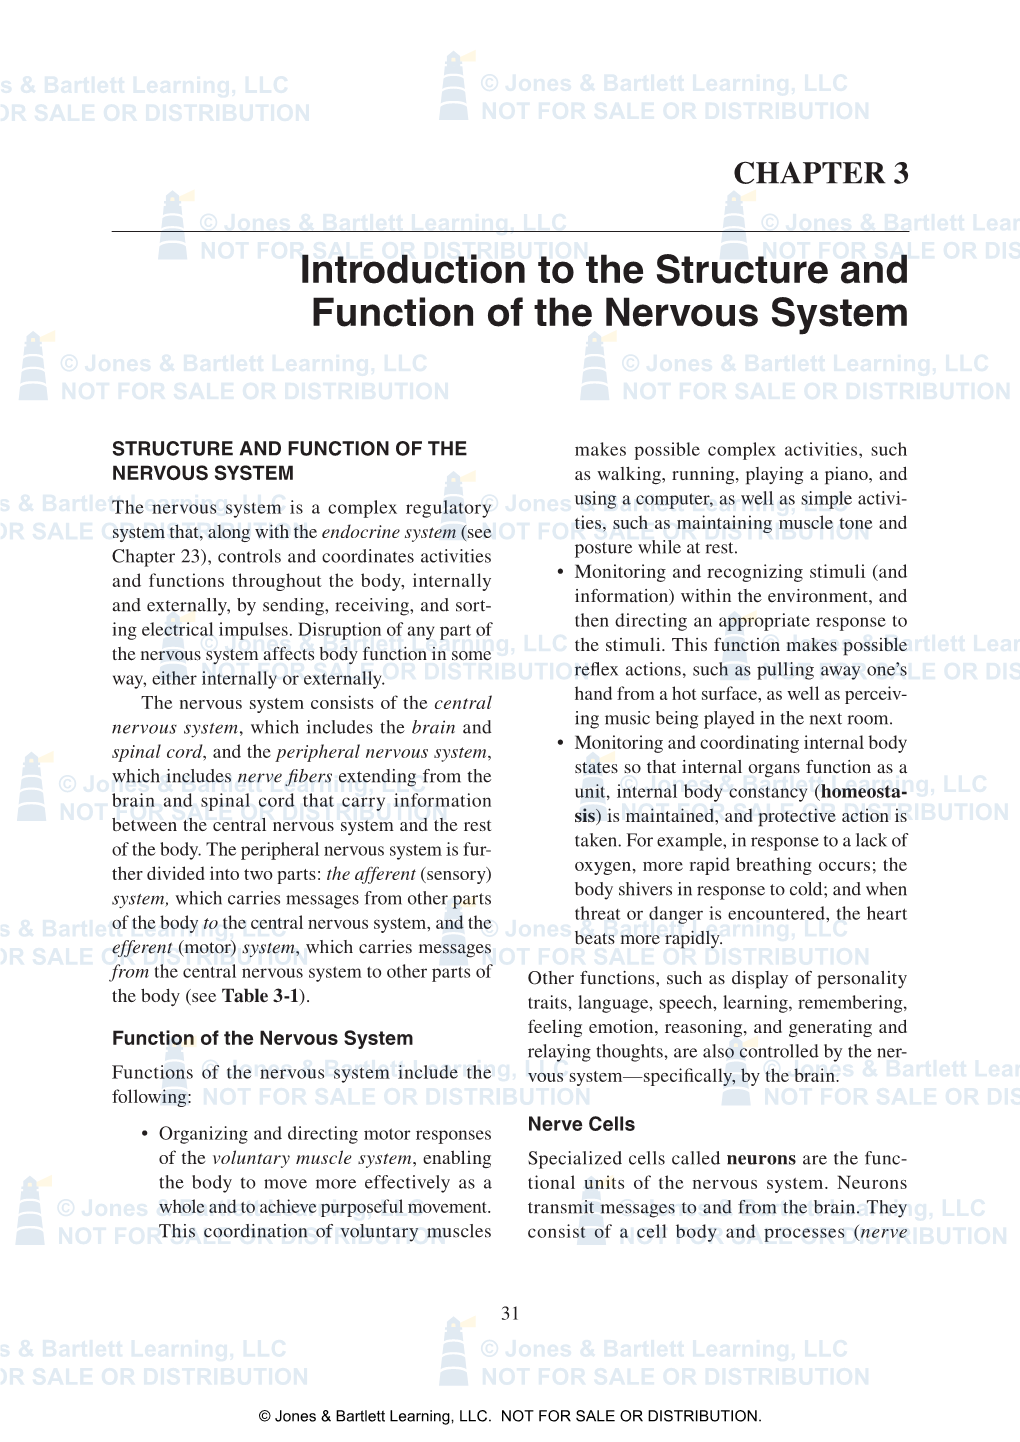 Introduction to the Structure and Function of the Nervous System